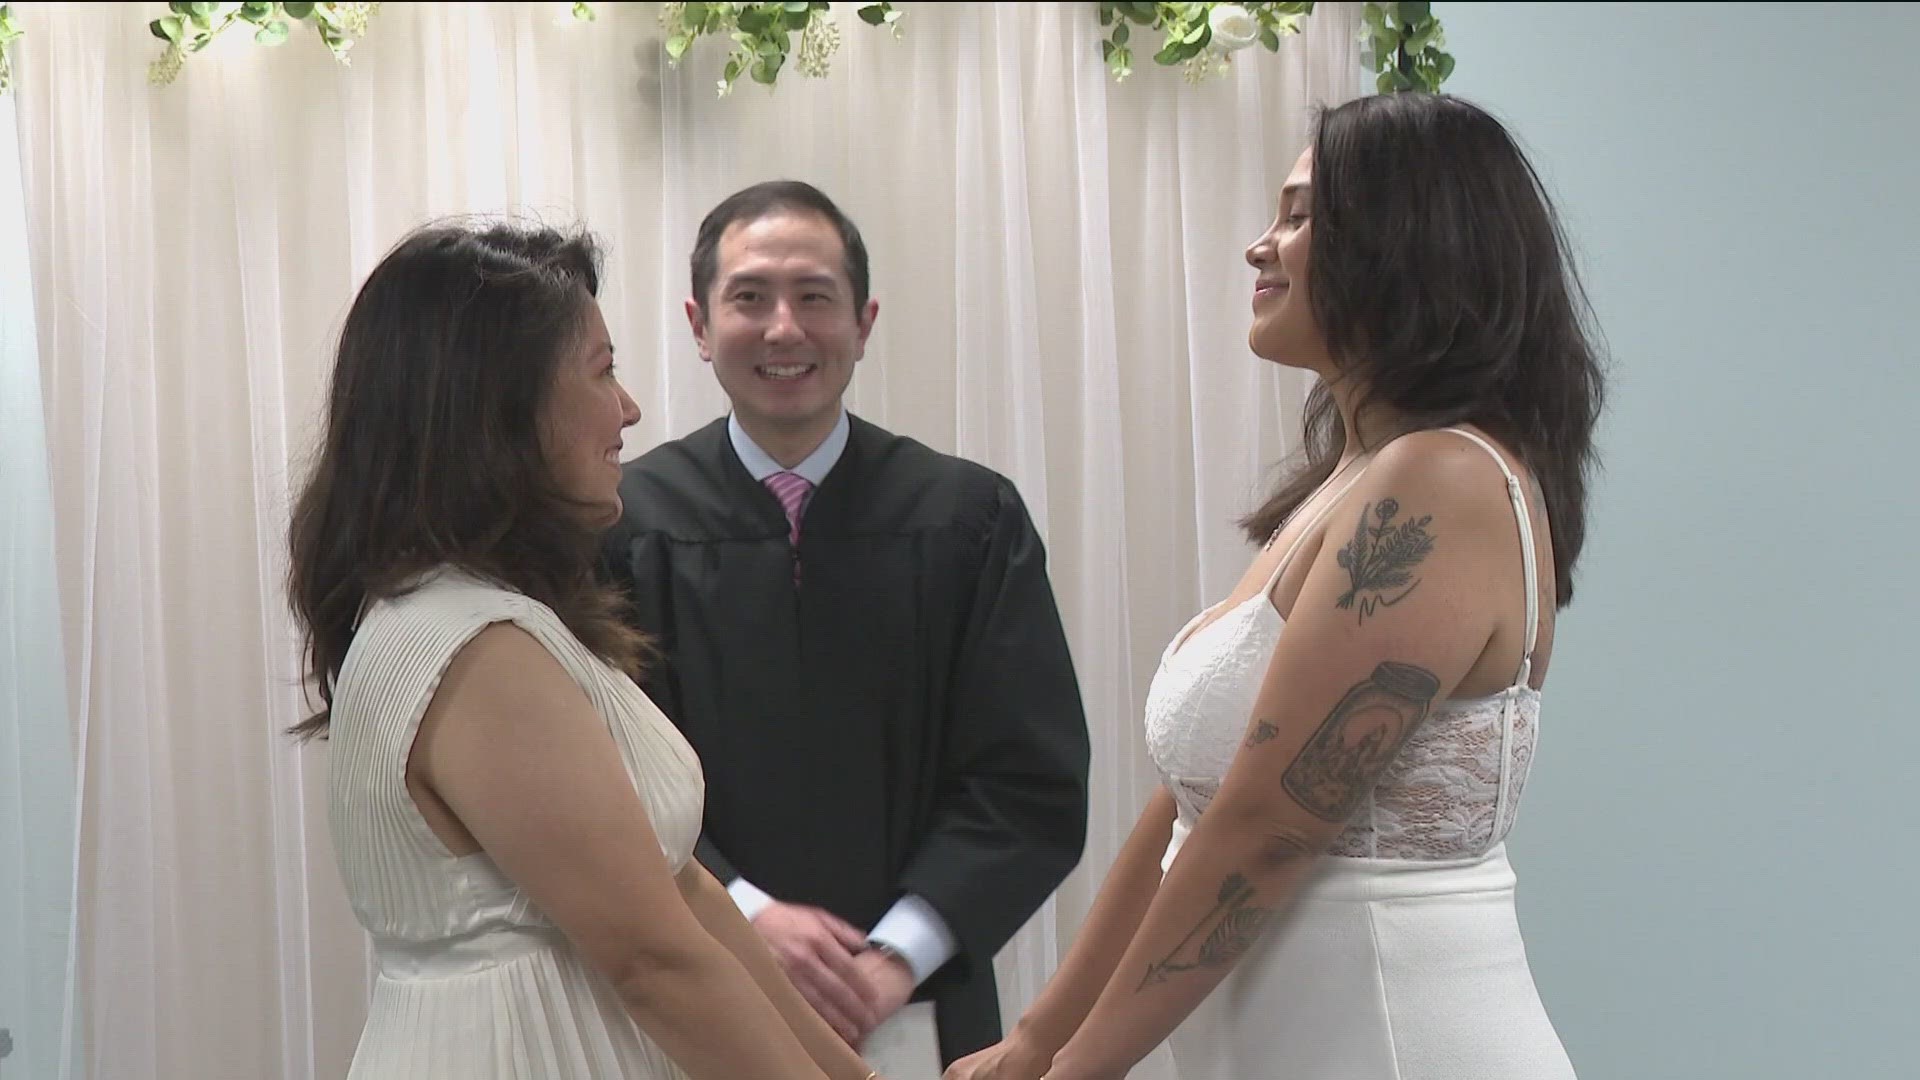 On Monday, the Travis County Clerk's Office celebrated marriage equality by offering free wedding ceremonies. KVUE caught up with some of the newlyweds.